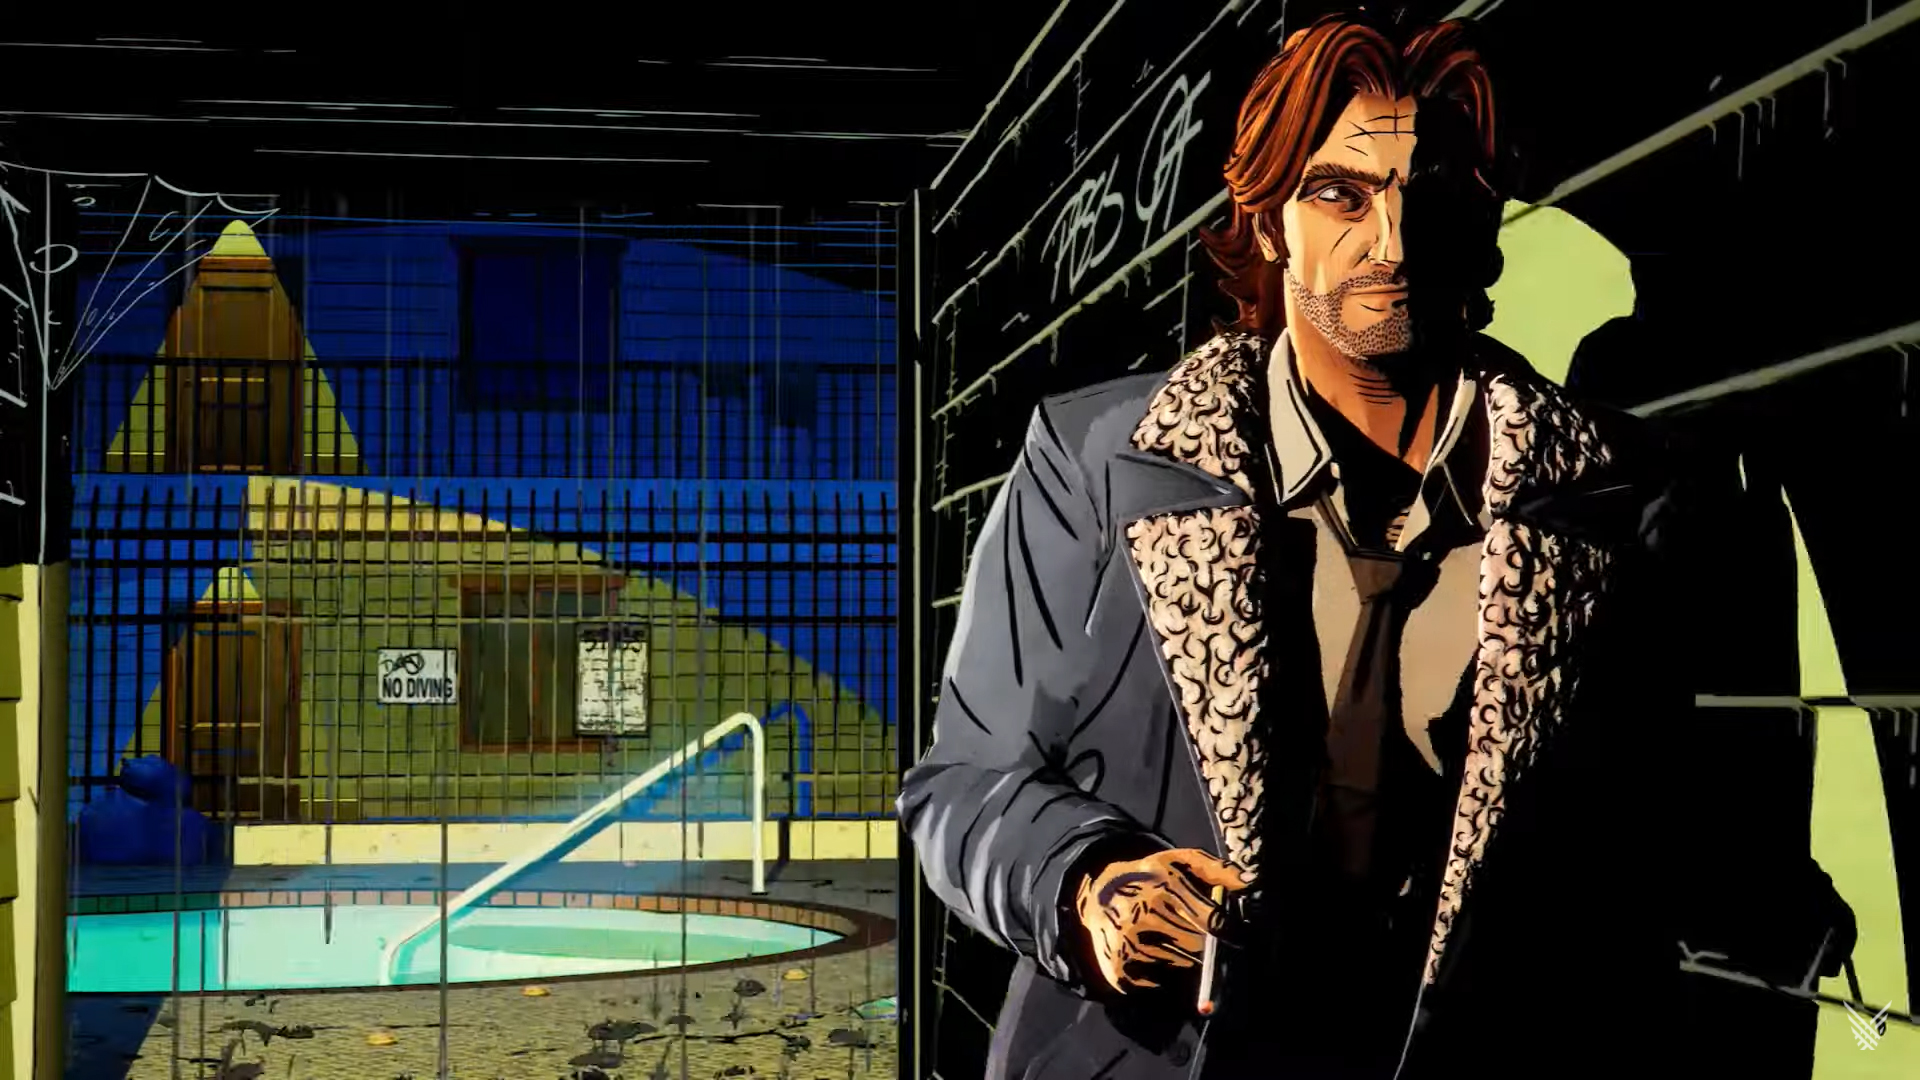  Telltale delays the Wolf Among Us 2 till at least next year, because if it's half-baked 'we're going to get torn to shreds' 